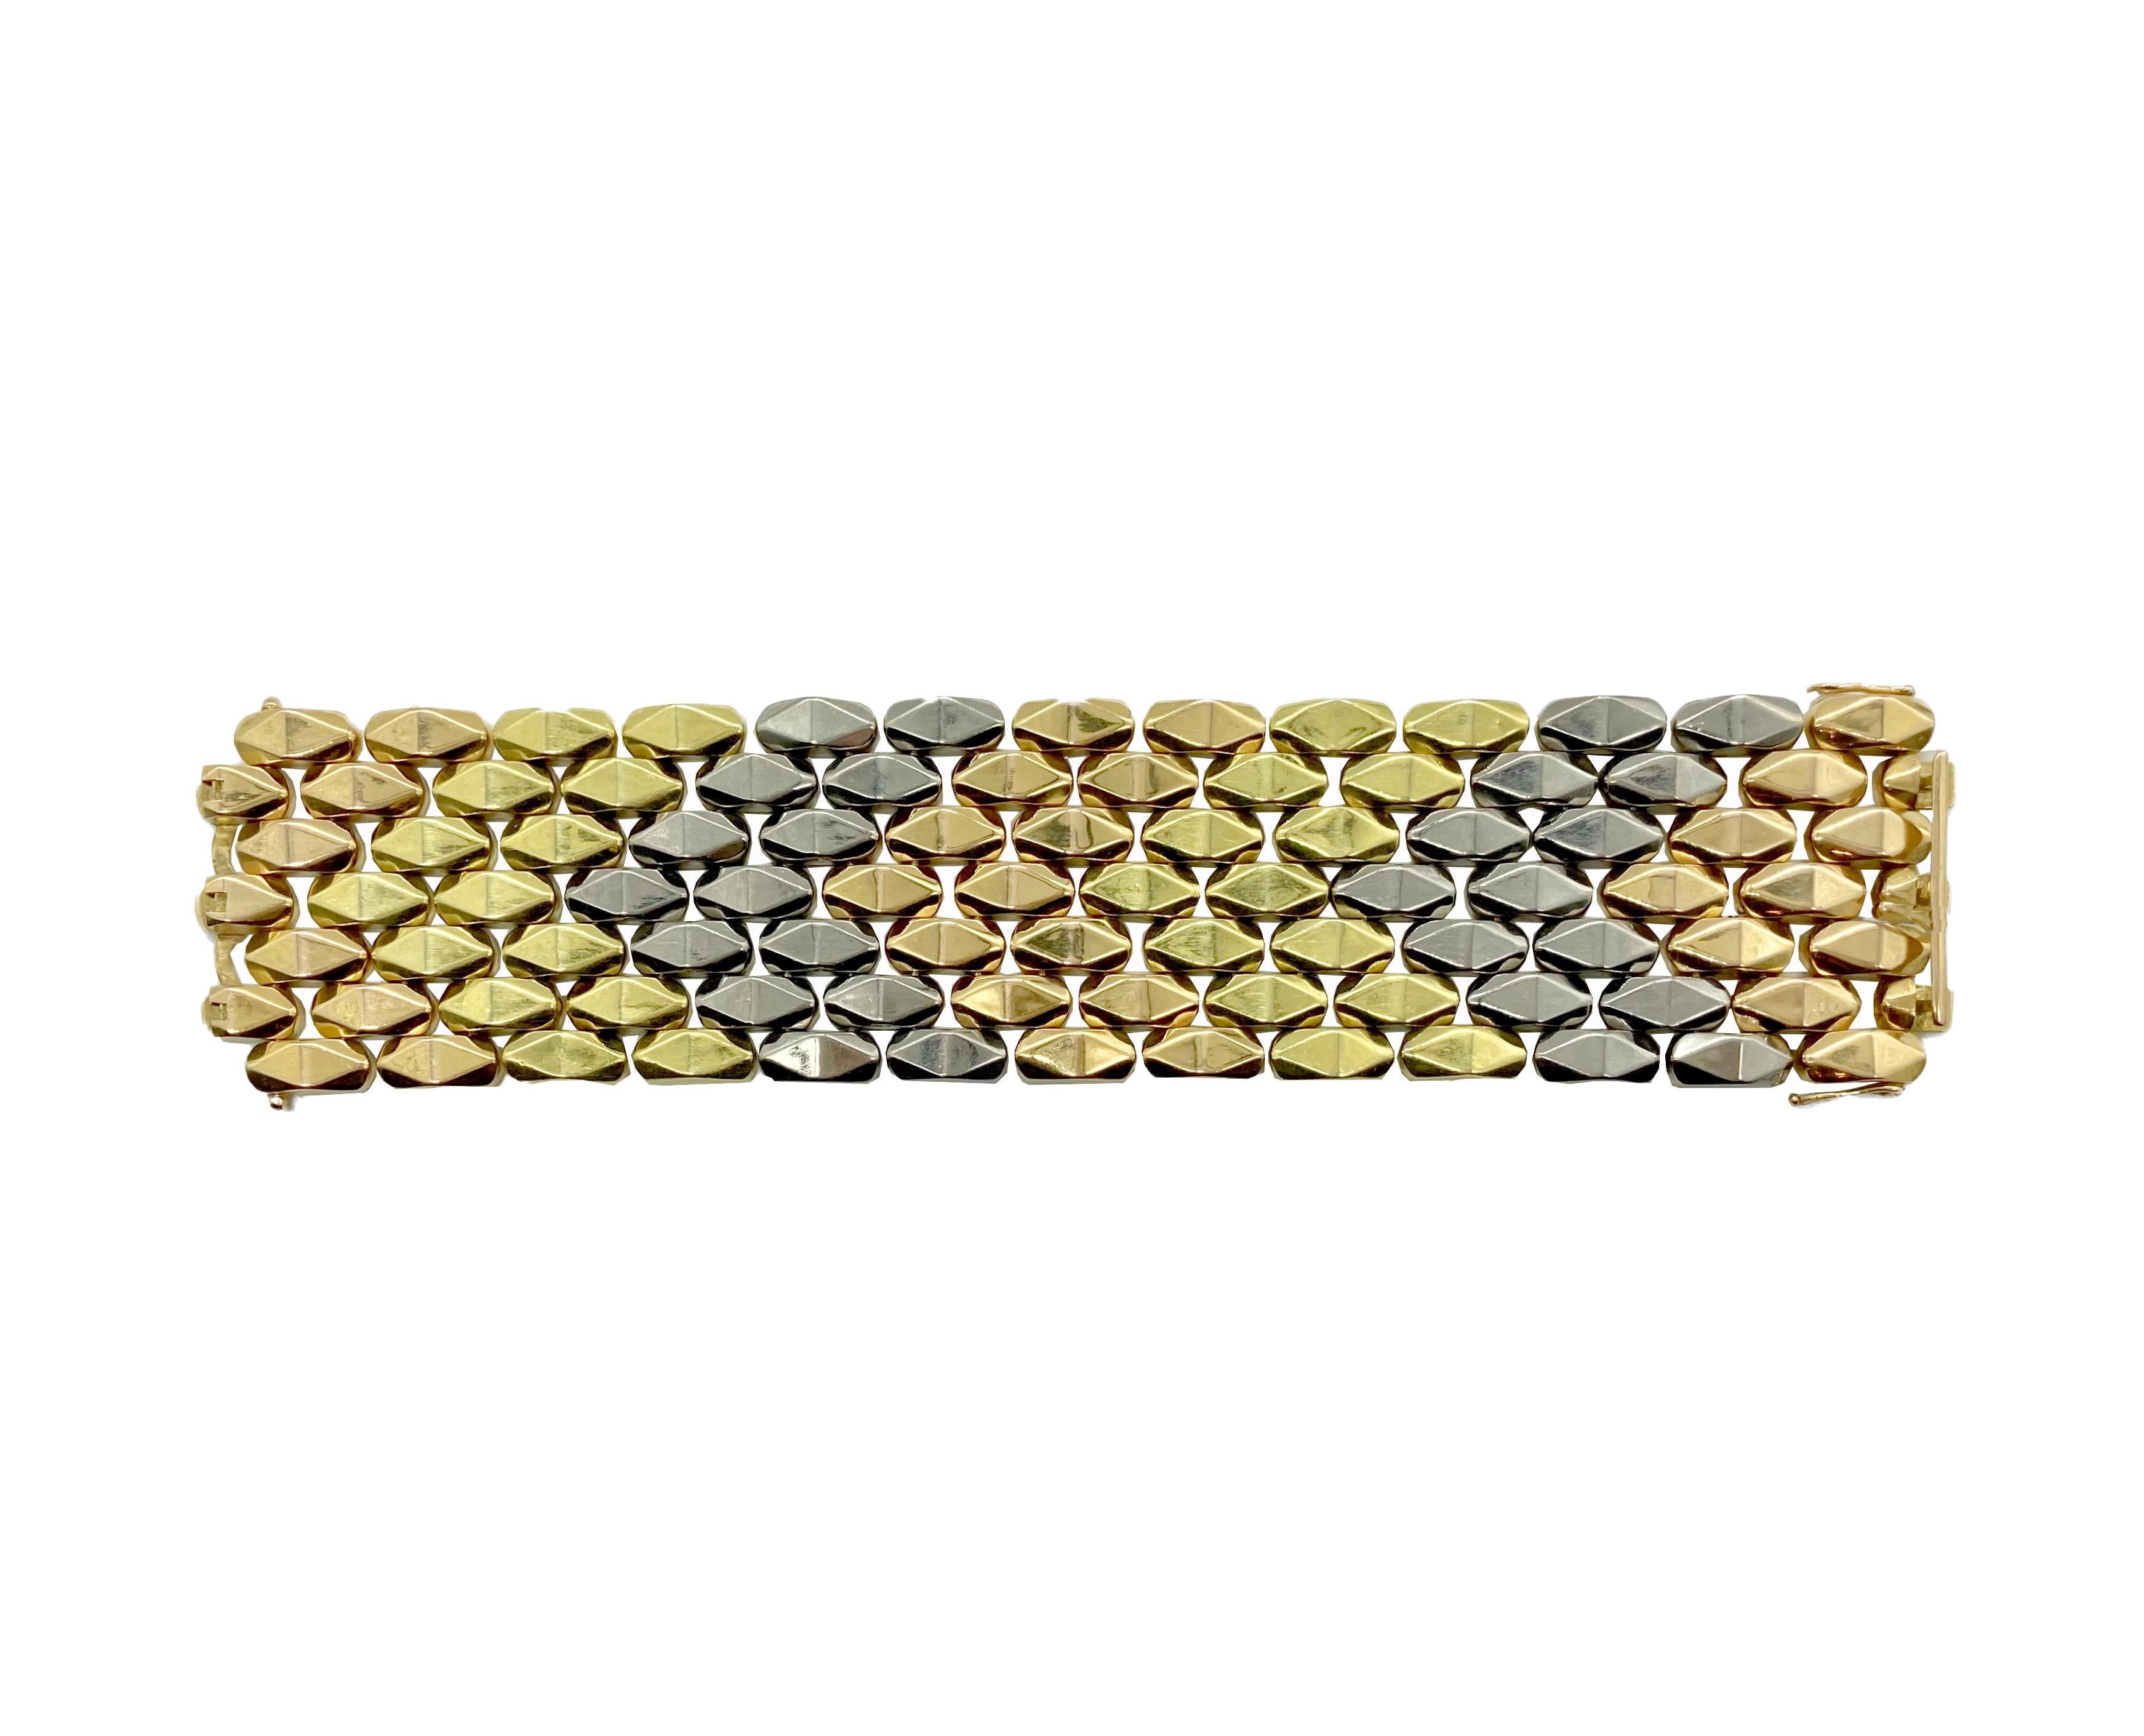 A substantial tri-color 18 karat yellow gold bracelet circa 1940s. Made in Italy.